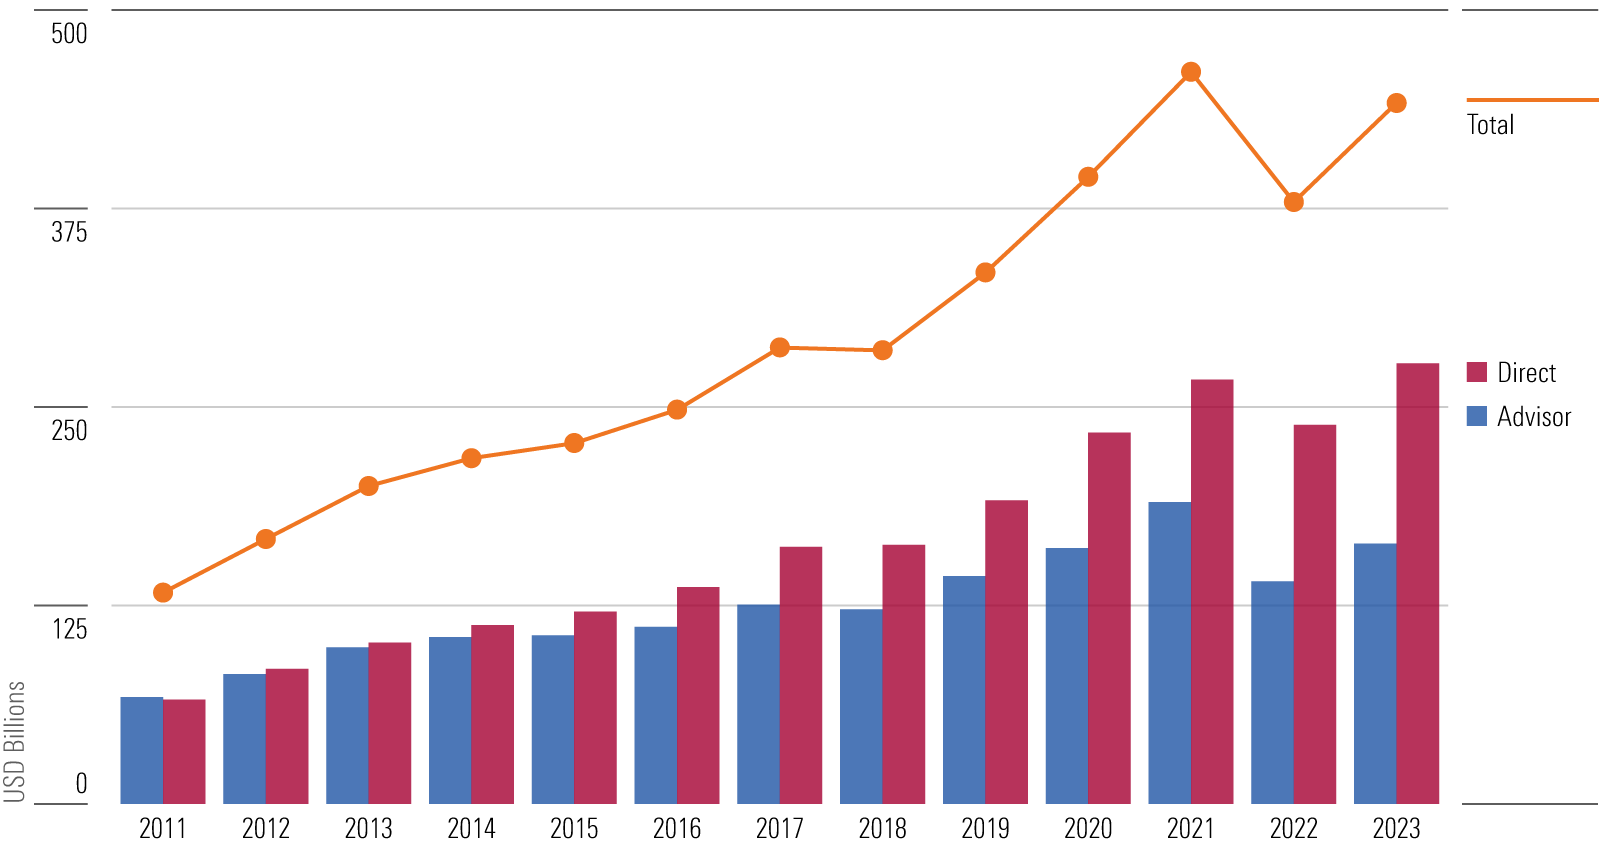 Bar chart showing the assets in 529 plans from 2011 through 2023.